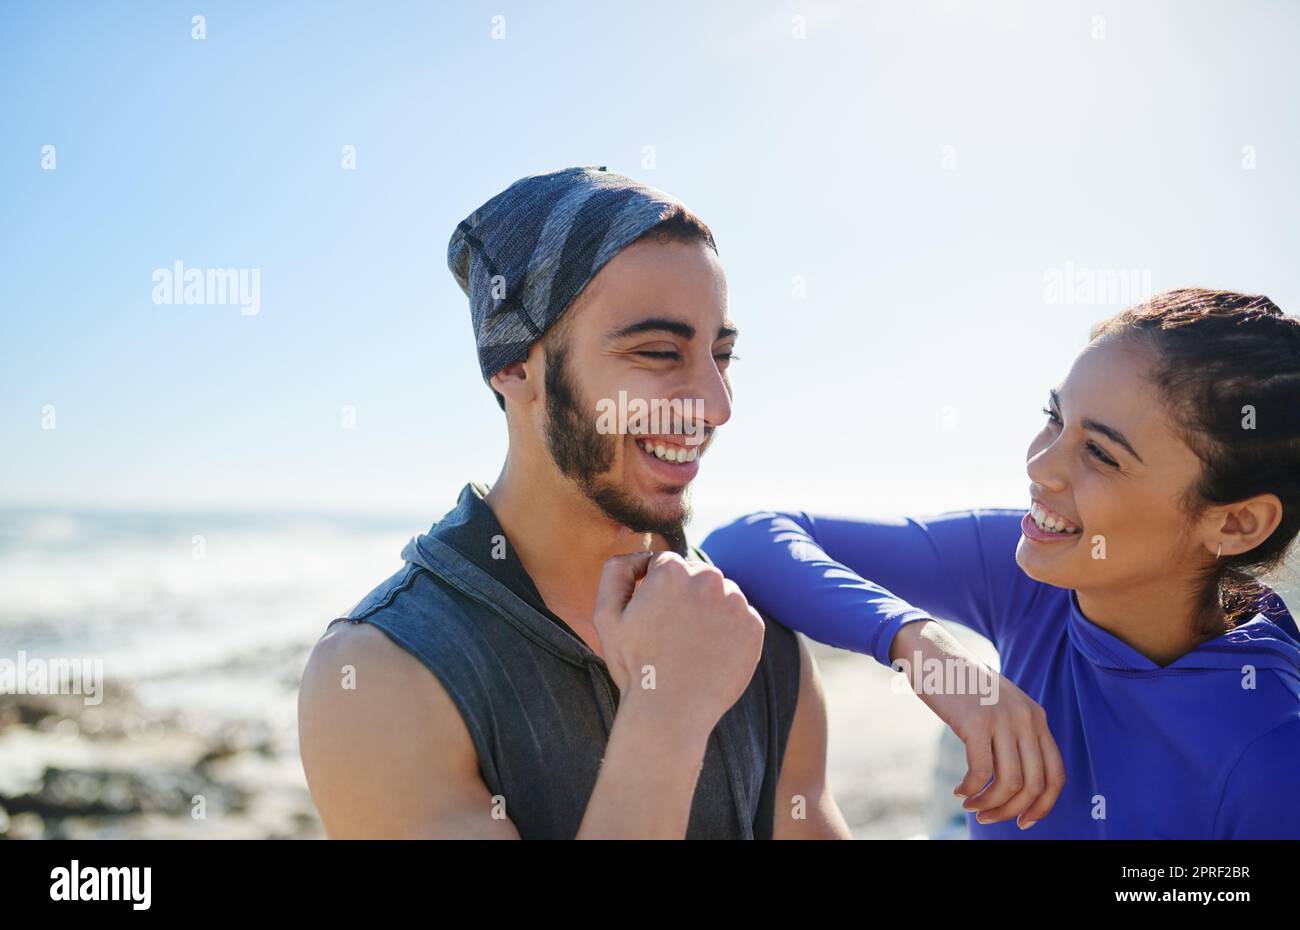 What a beautiful day to be out. two young cheerful friends hanging out together before a fitness exercise outside during the day. Stock Photo